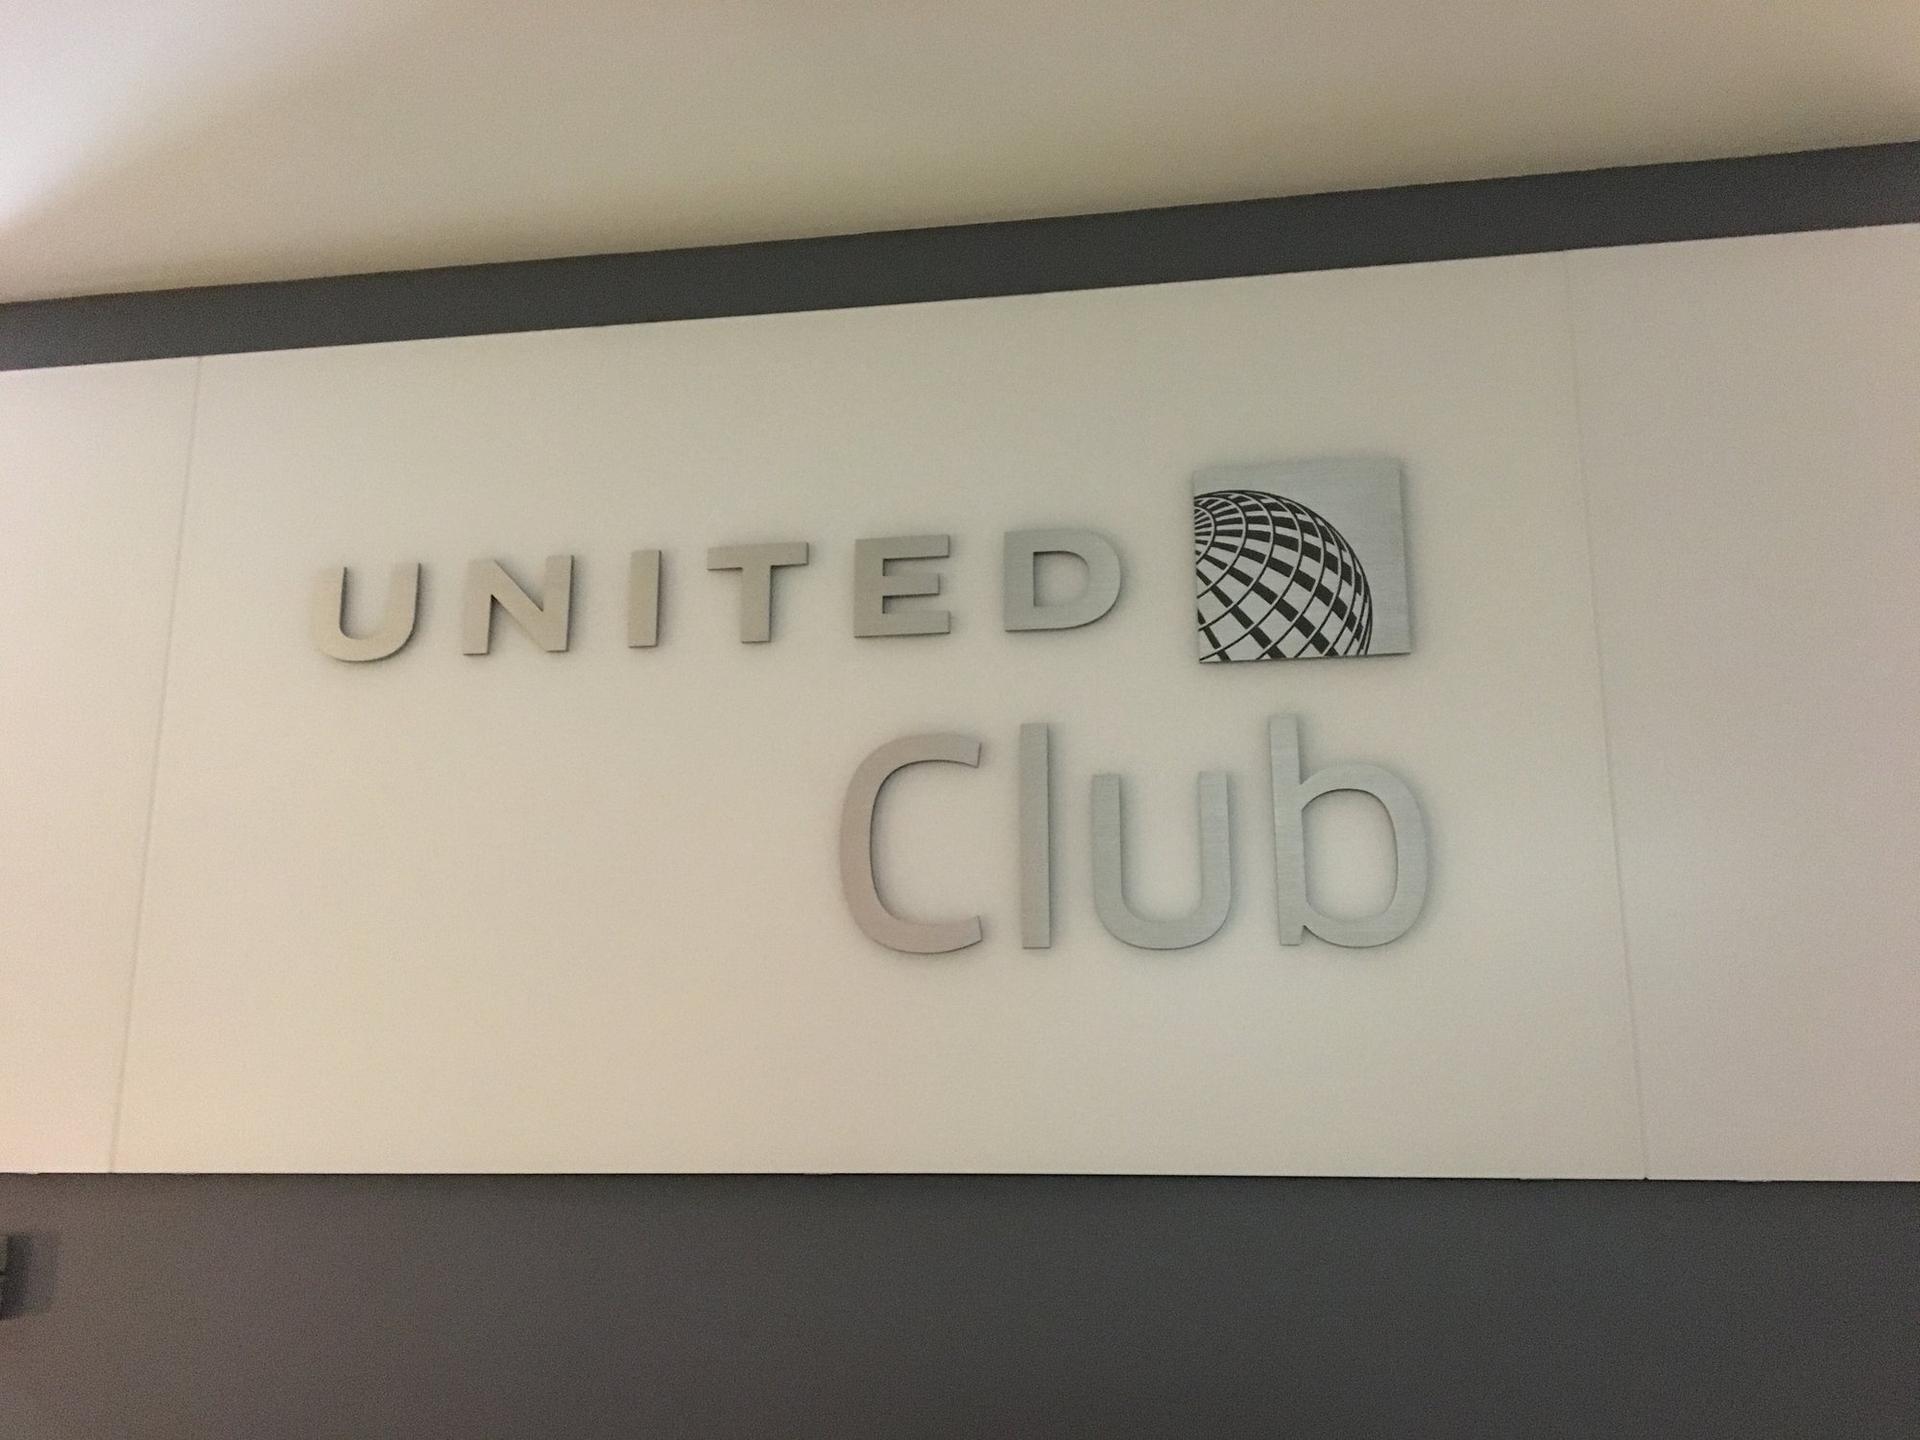 United Airlines United Club image 2 of 12